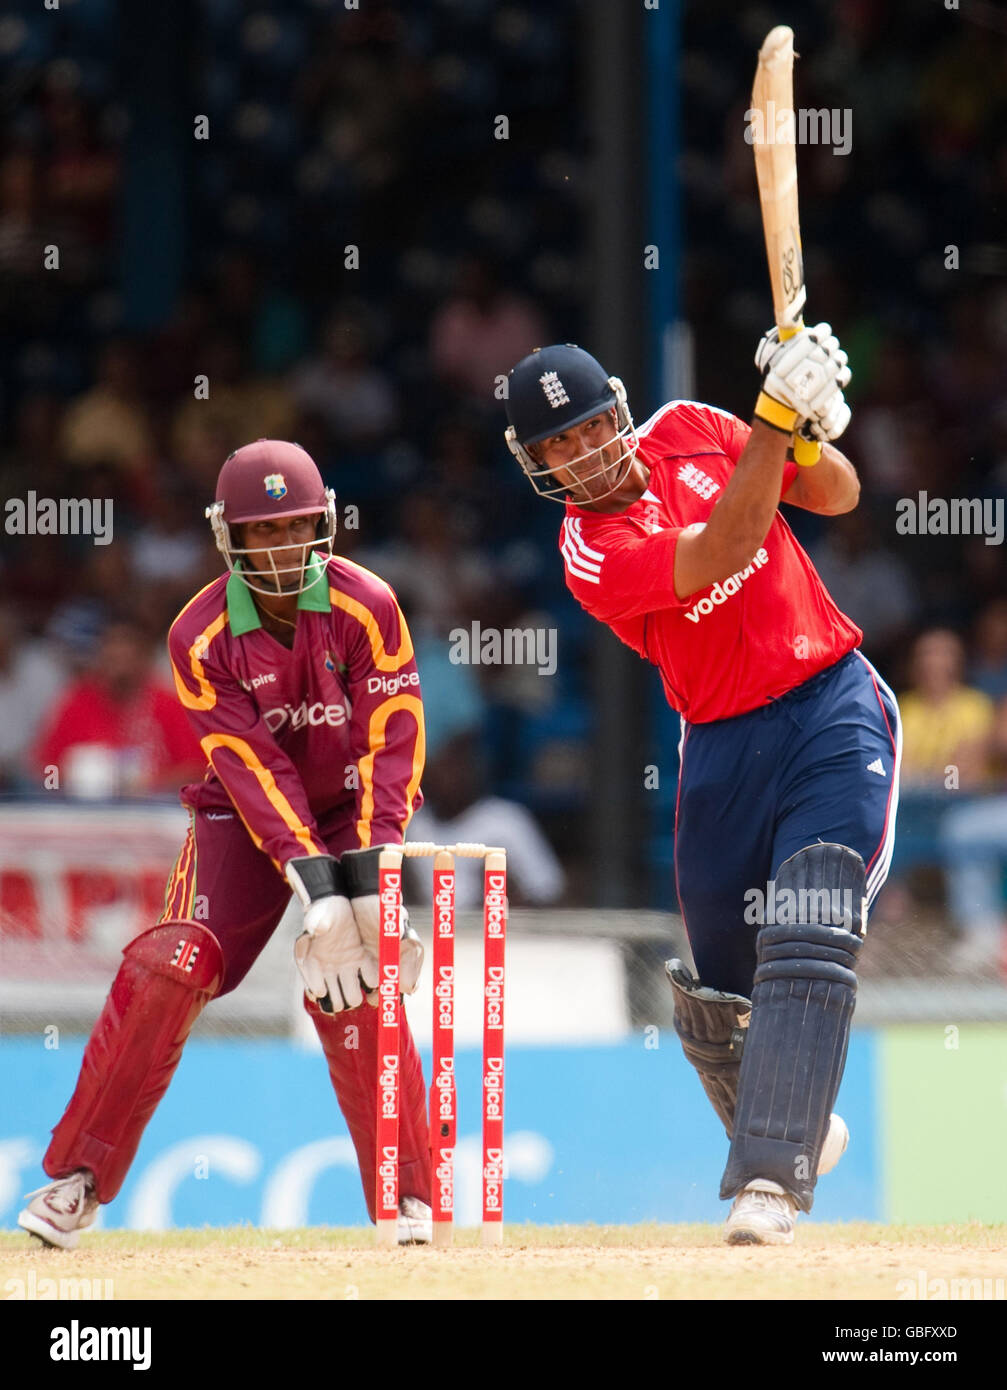 England's Owais Shah hits out only to be caught out by West Indies' Keiron Polland during the Twenty20 International at Queen's Park Oval, Port of Spain, Trinidad. Stock Photo